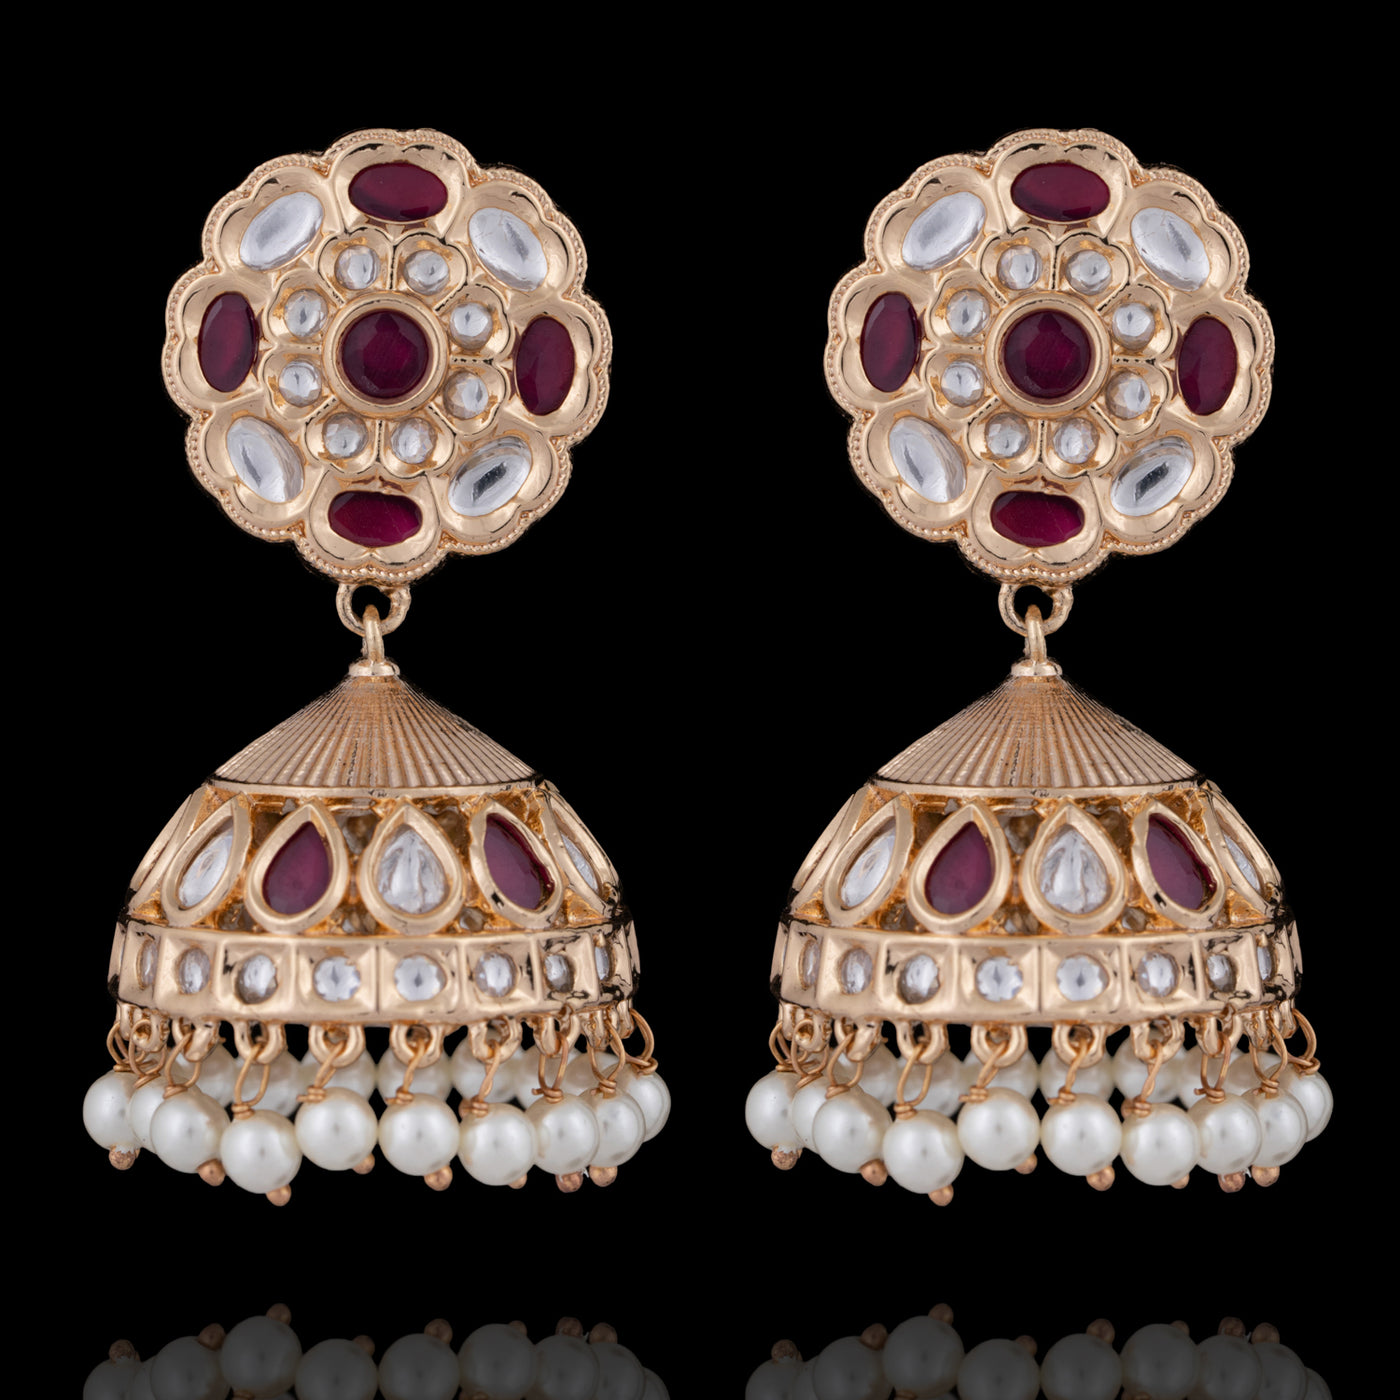 Nikki Earrings - Available in 2 Colors